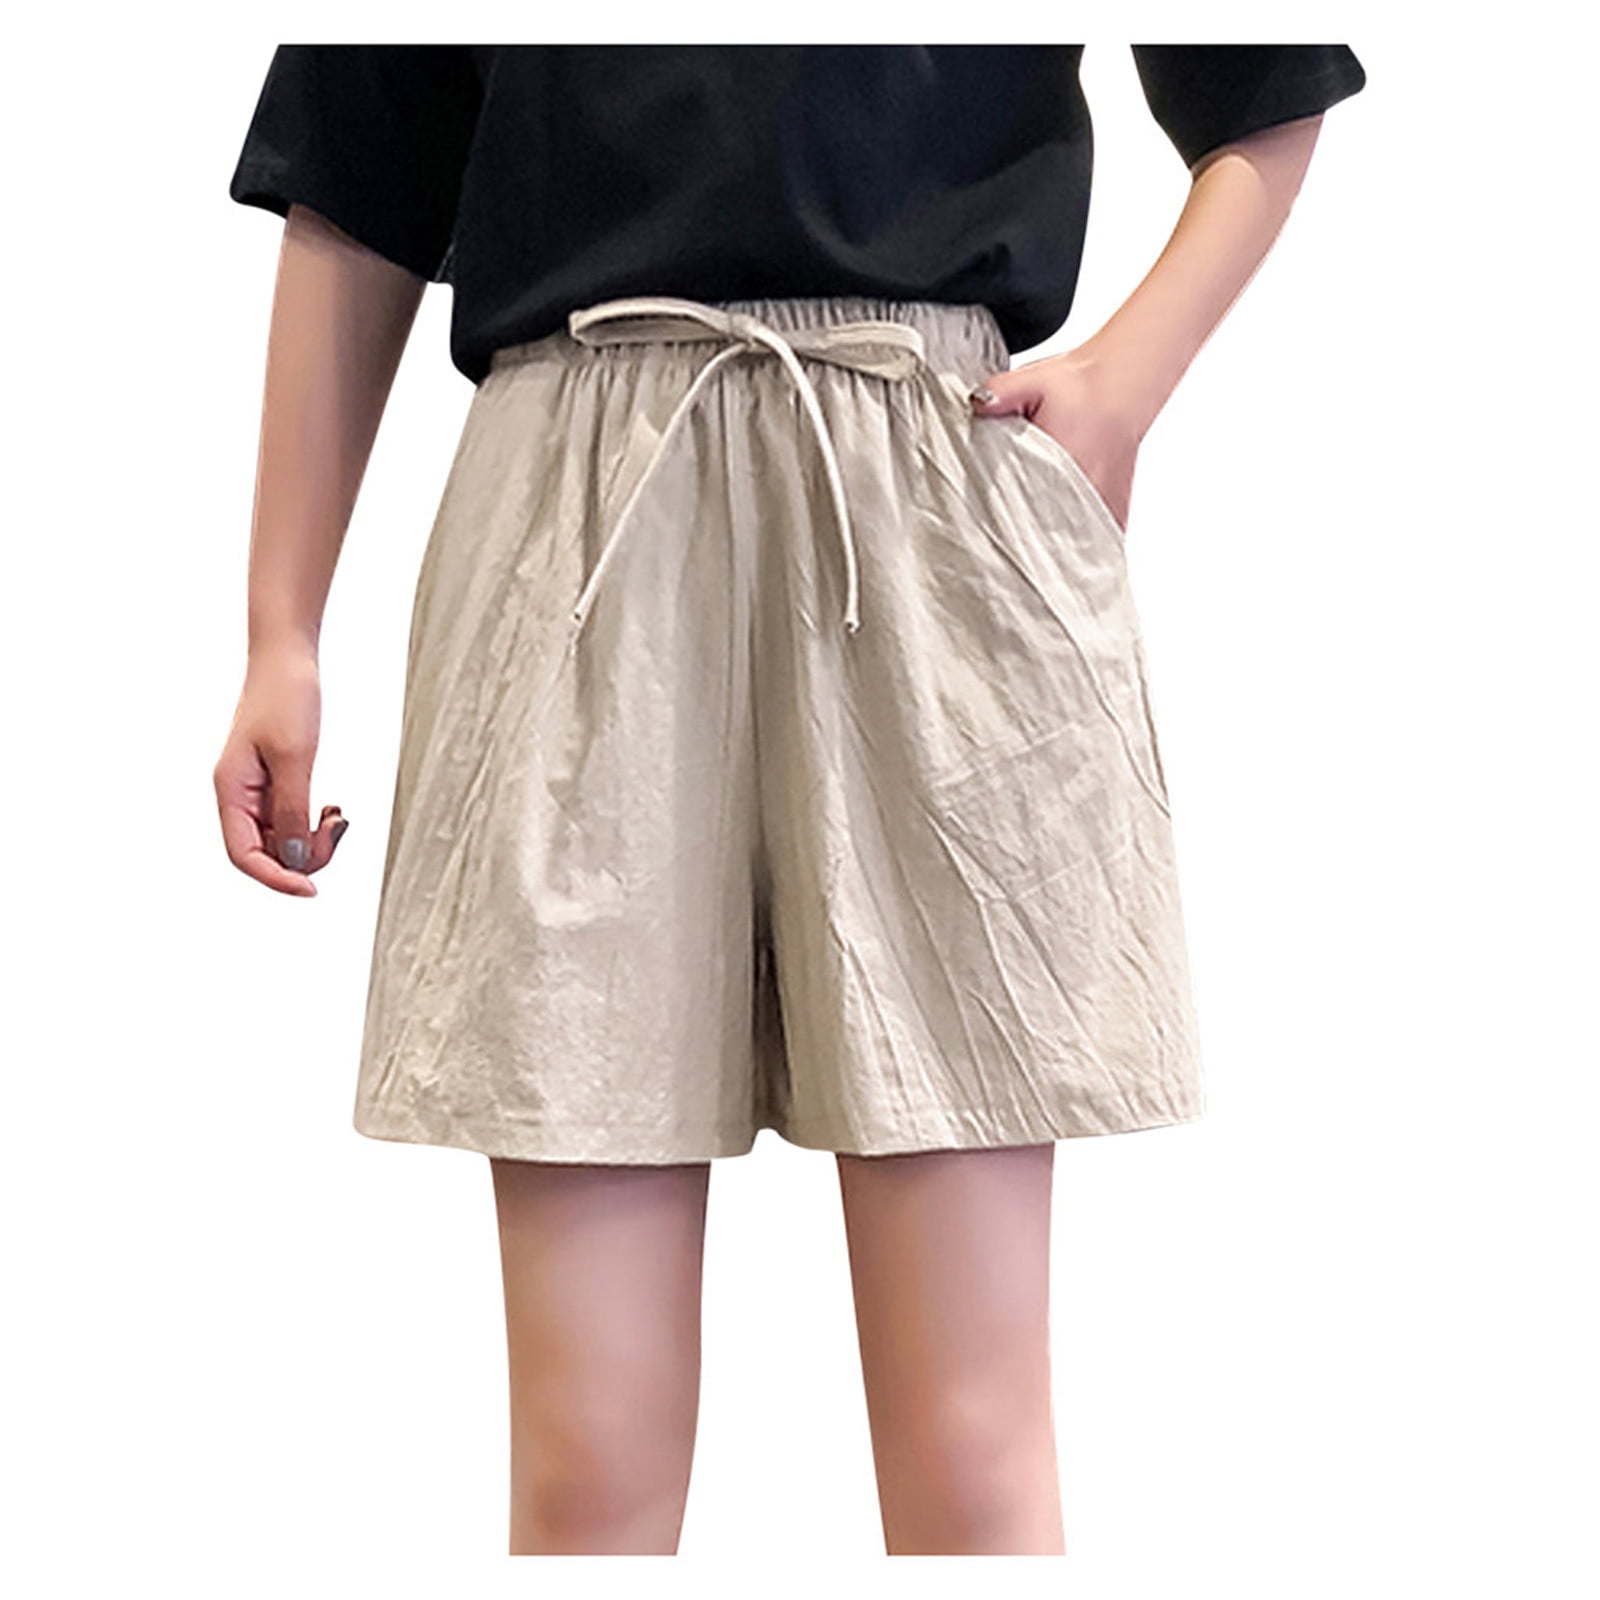 Forte Forte Synthetic Shorts & Bermuda Shorts in Dark Blue Blue Womens Clothing Shorts Knee-length shorts and long shorts 